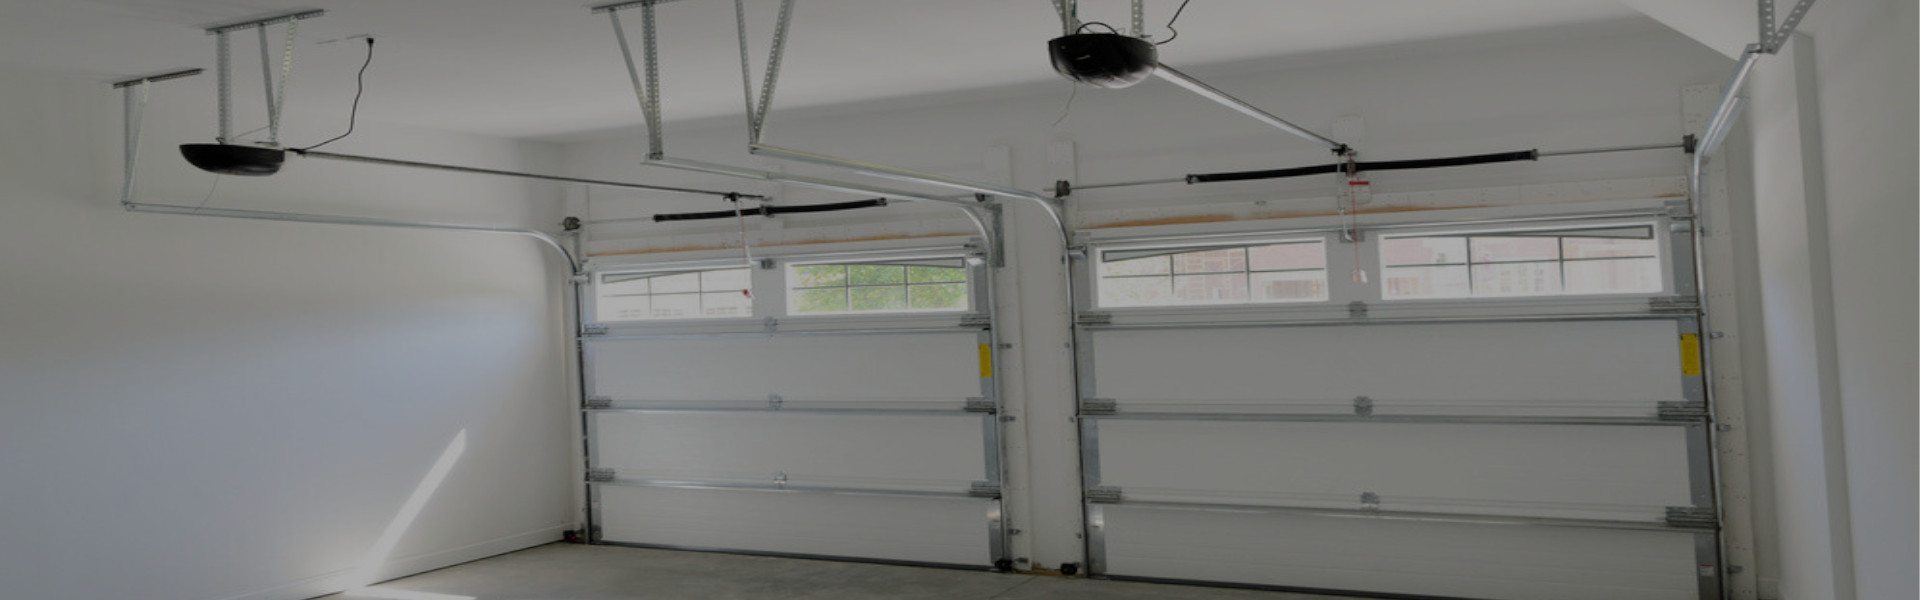 Slider Garage Door Repair, Glaziers in Bromley-by-Bow, Bow, E3